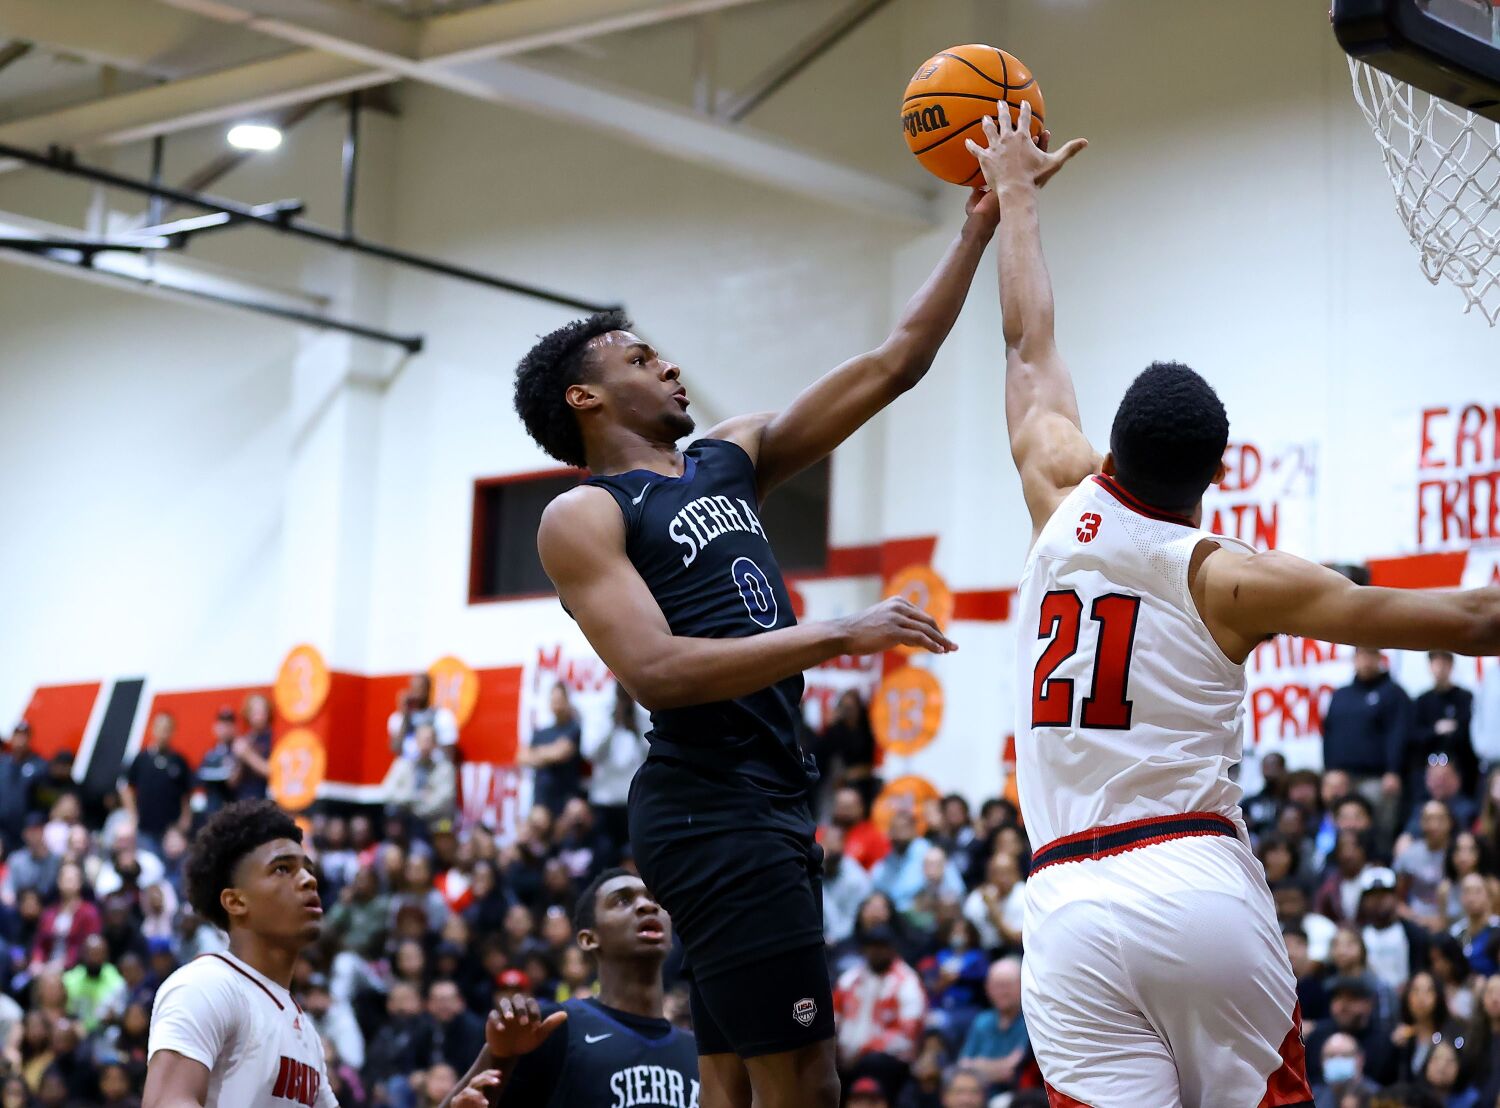 Corona Centennial withstands Sierra Canyon rally for narrow playoff win